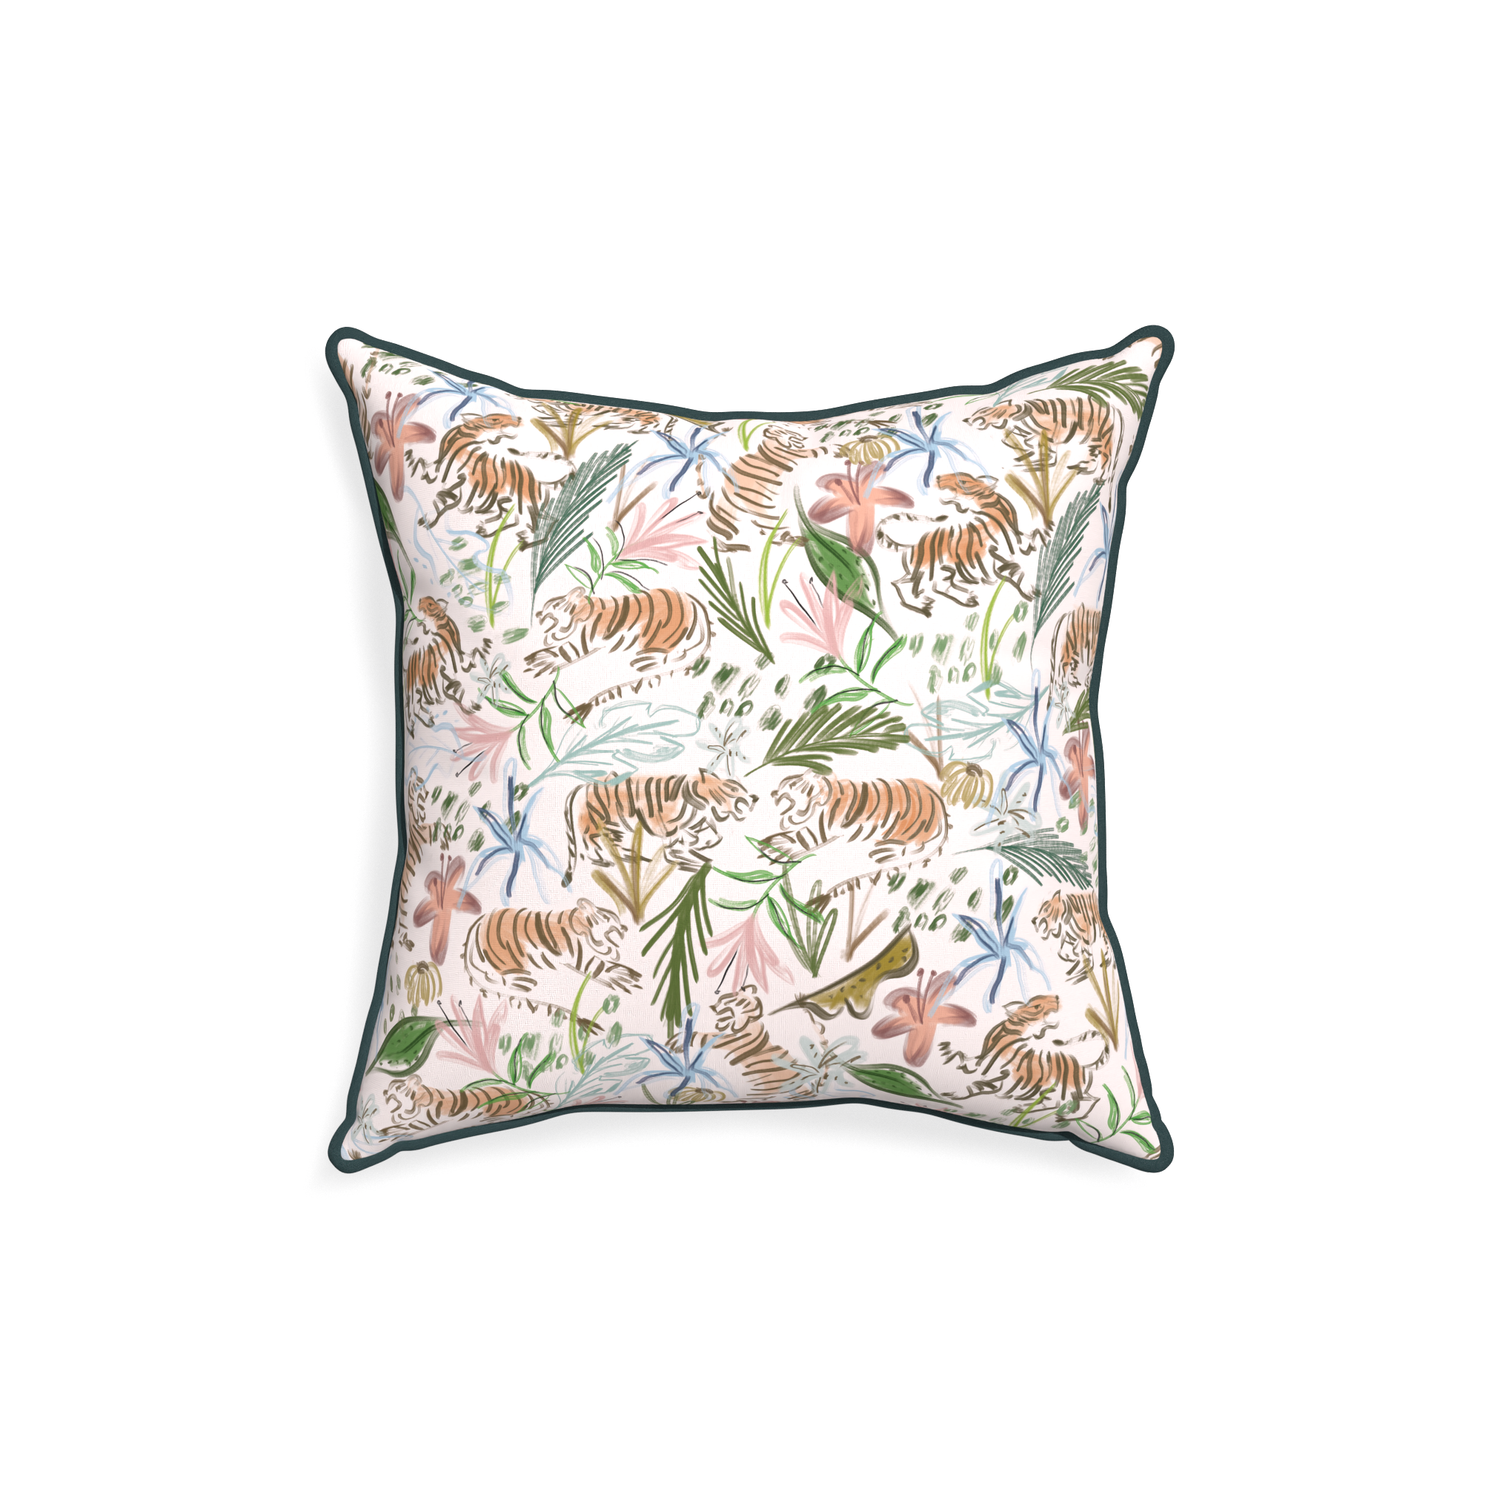 18-square frida pink custom pink chinoiserie tigerpillow with p piping on white background